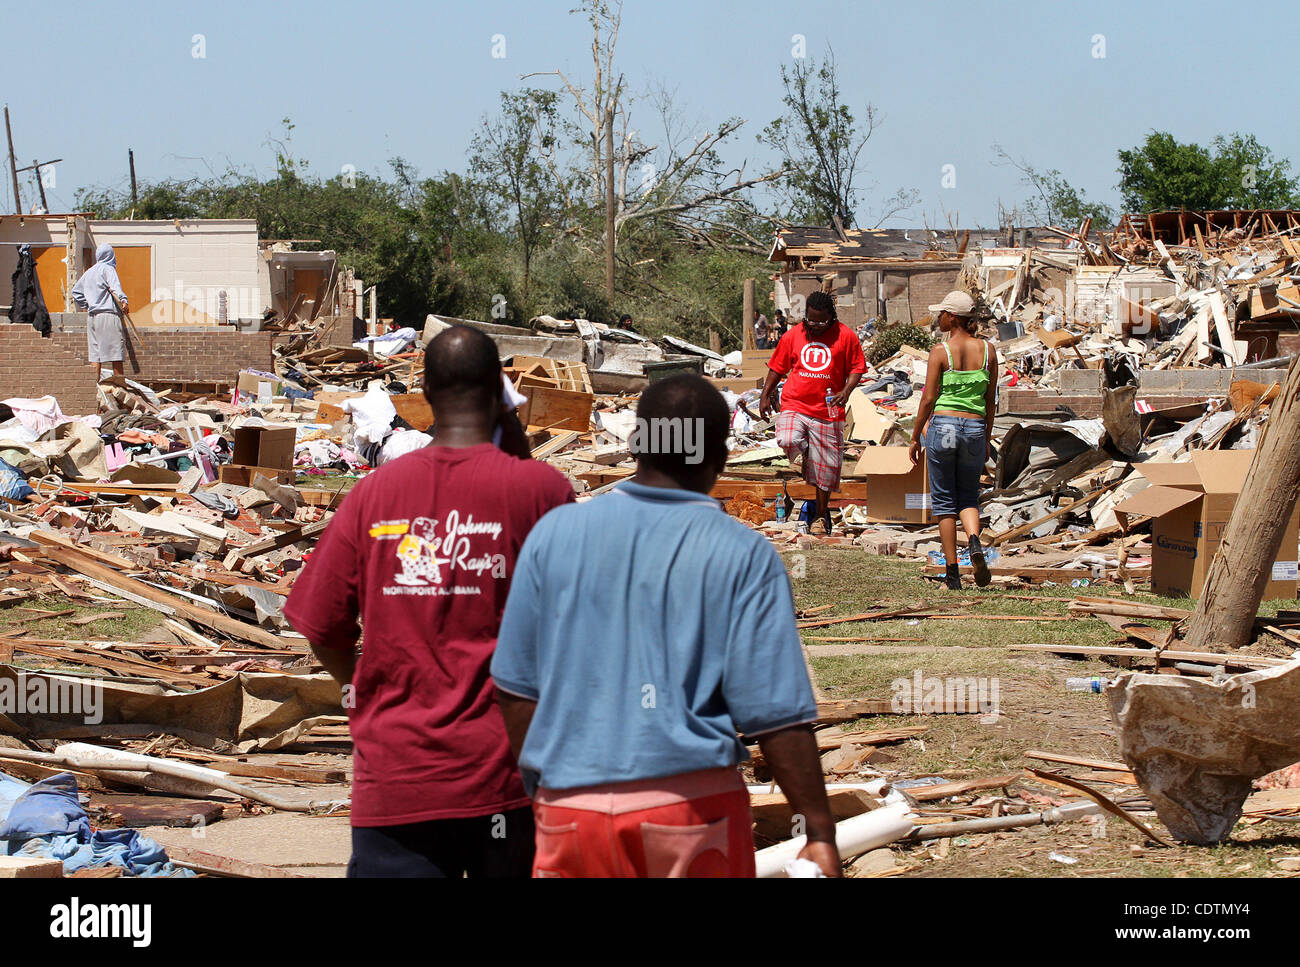 People go through the rubbile of what is left several days after tornadoes ravaged Tuscaloosa, Alabama USA, on 29 April 2011.  Over 100 have been confirmed dead in the state after deadly tornados destroyed homes and businesses yesterday. Stock Photo